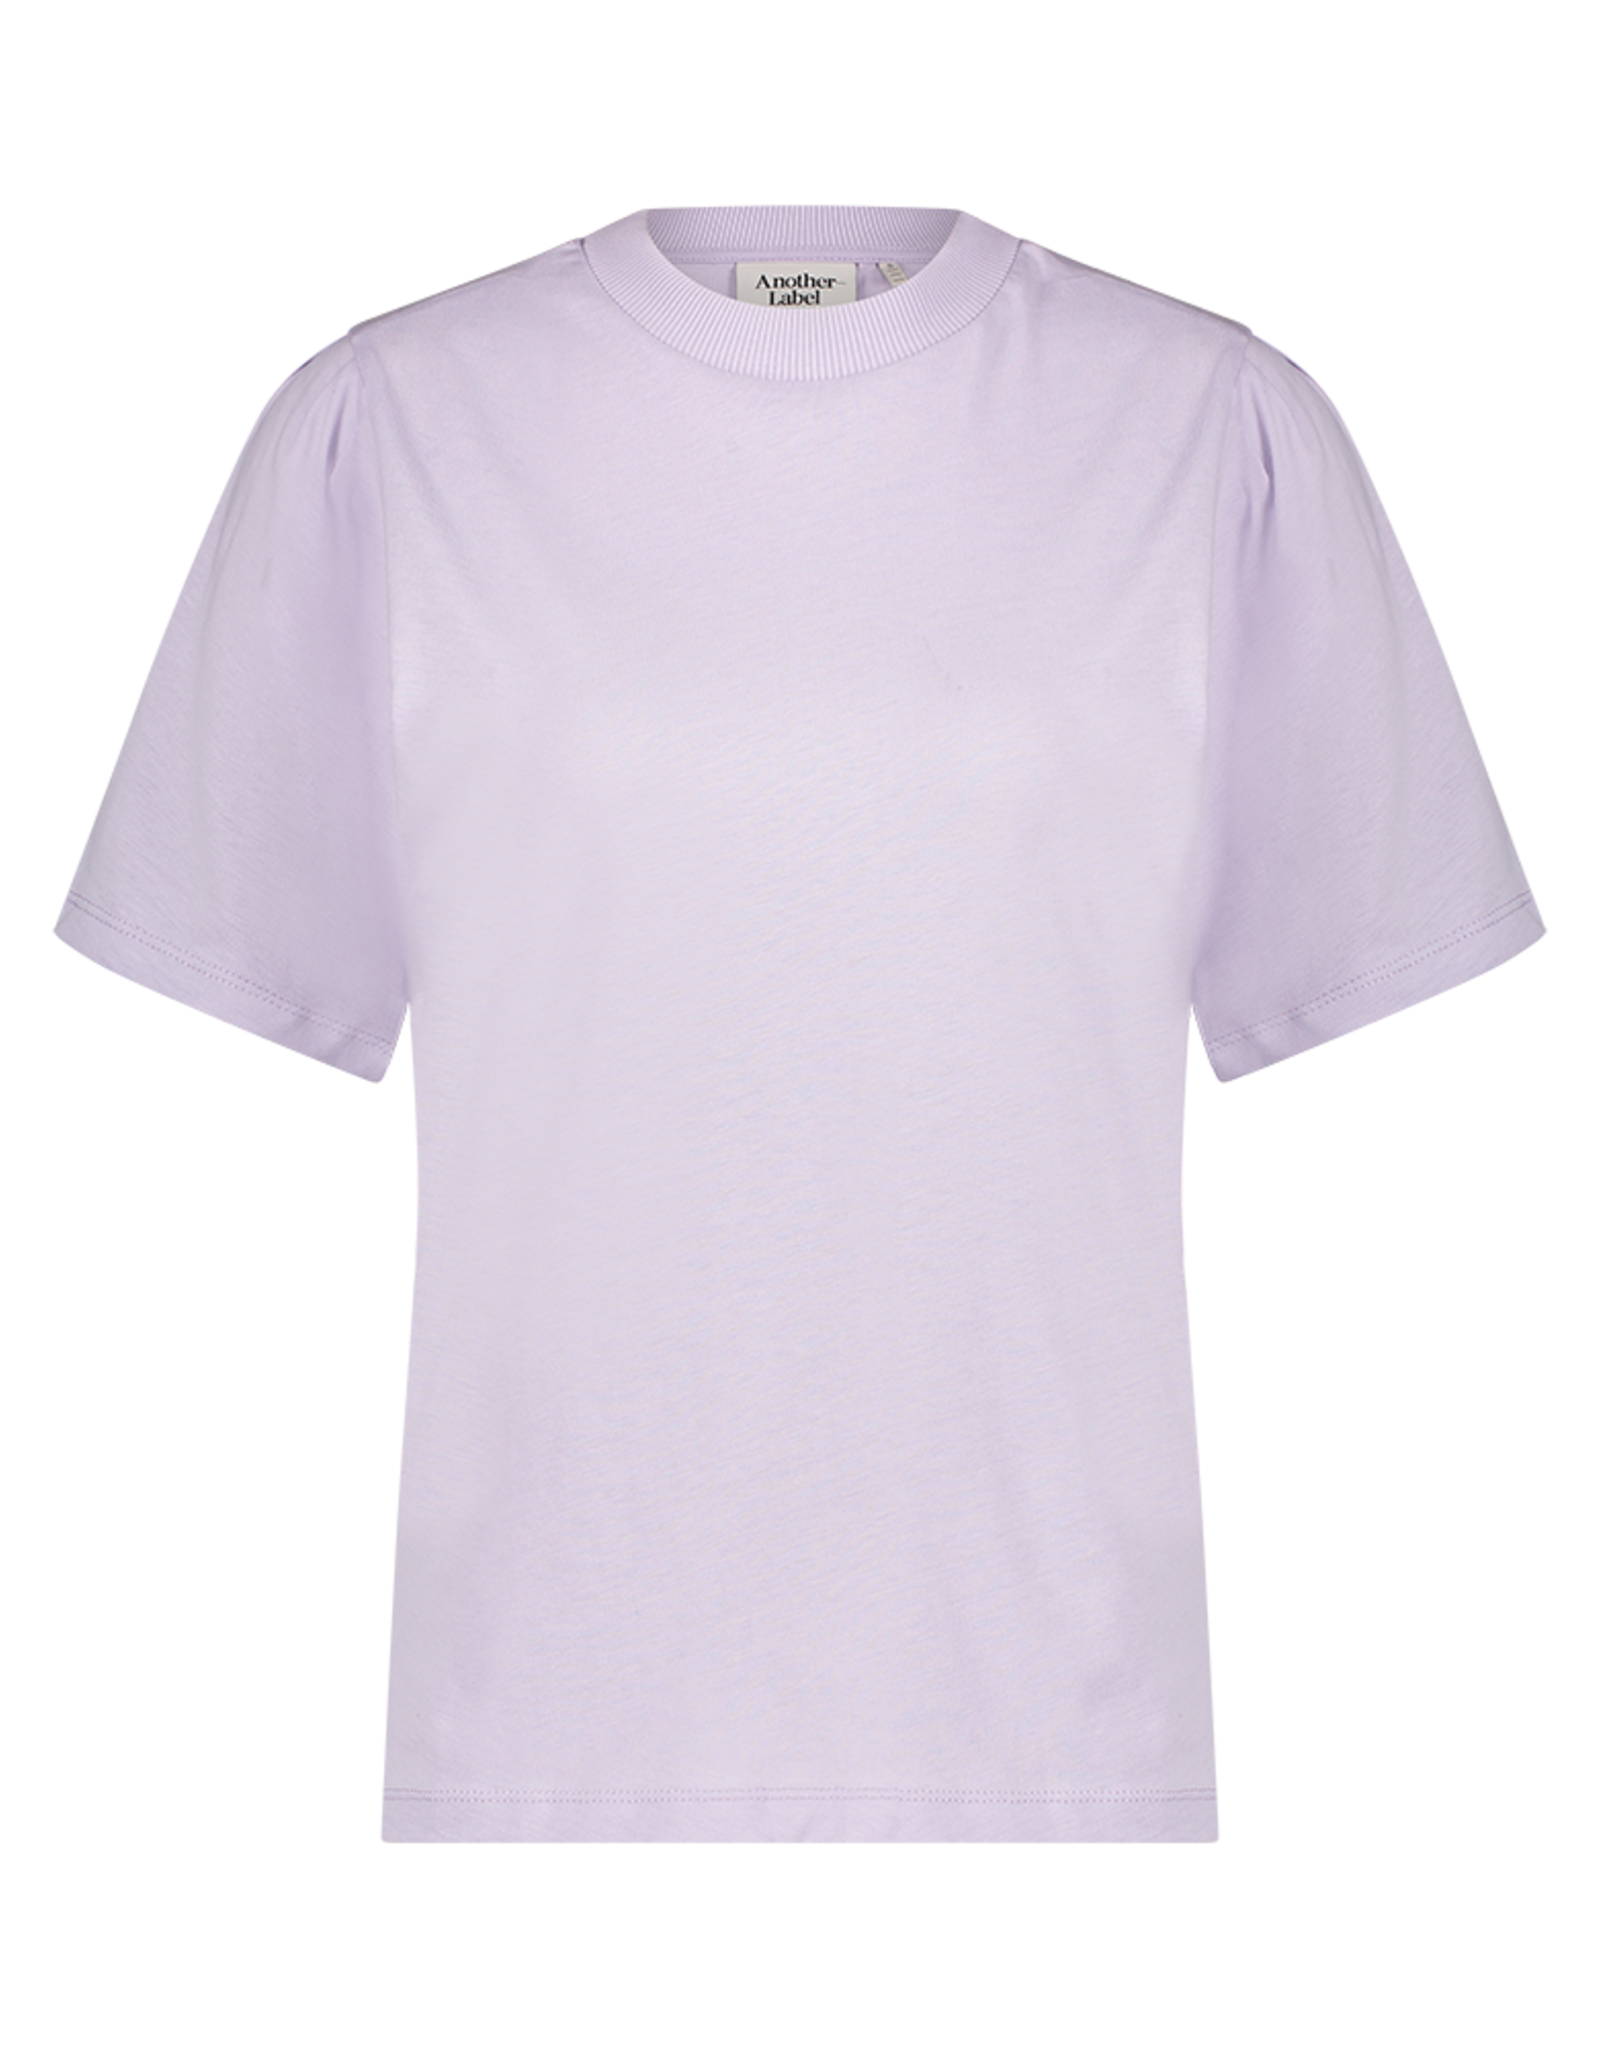 Another Label T-shirt 'Gaure' - Purple Heather - Another-Label